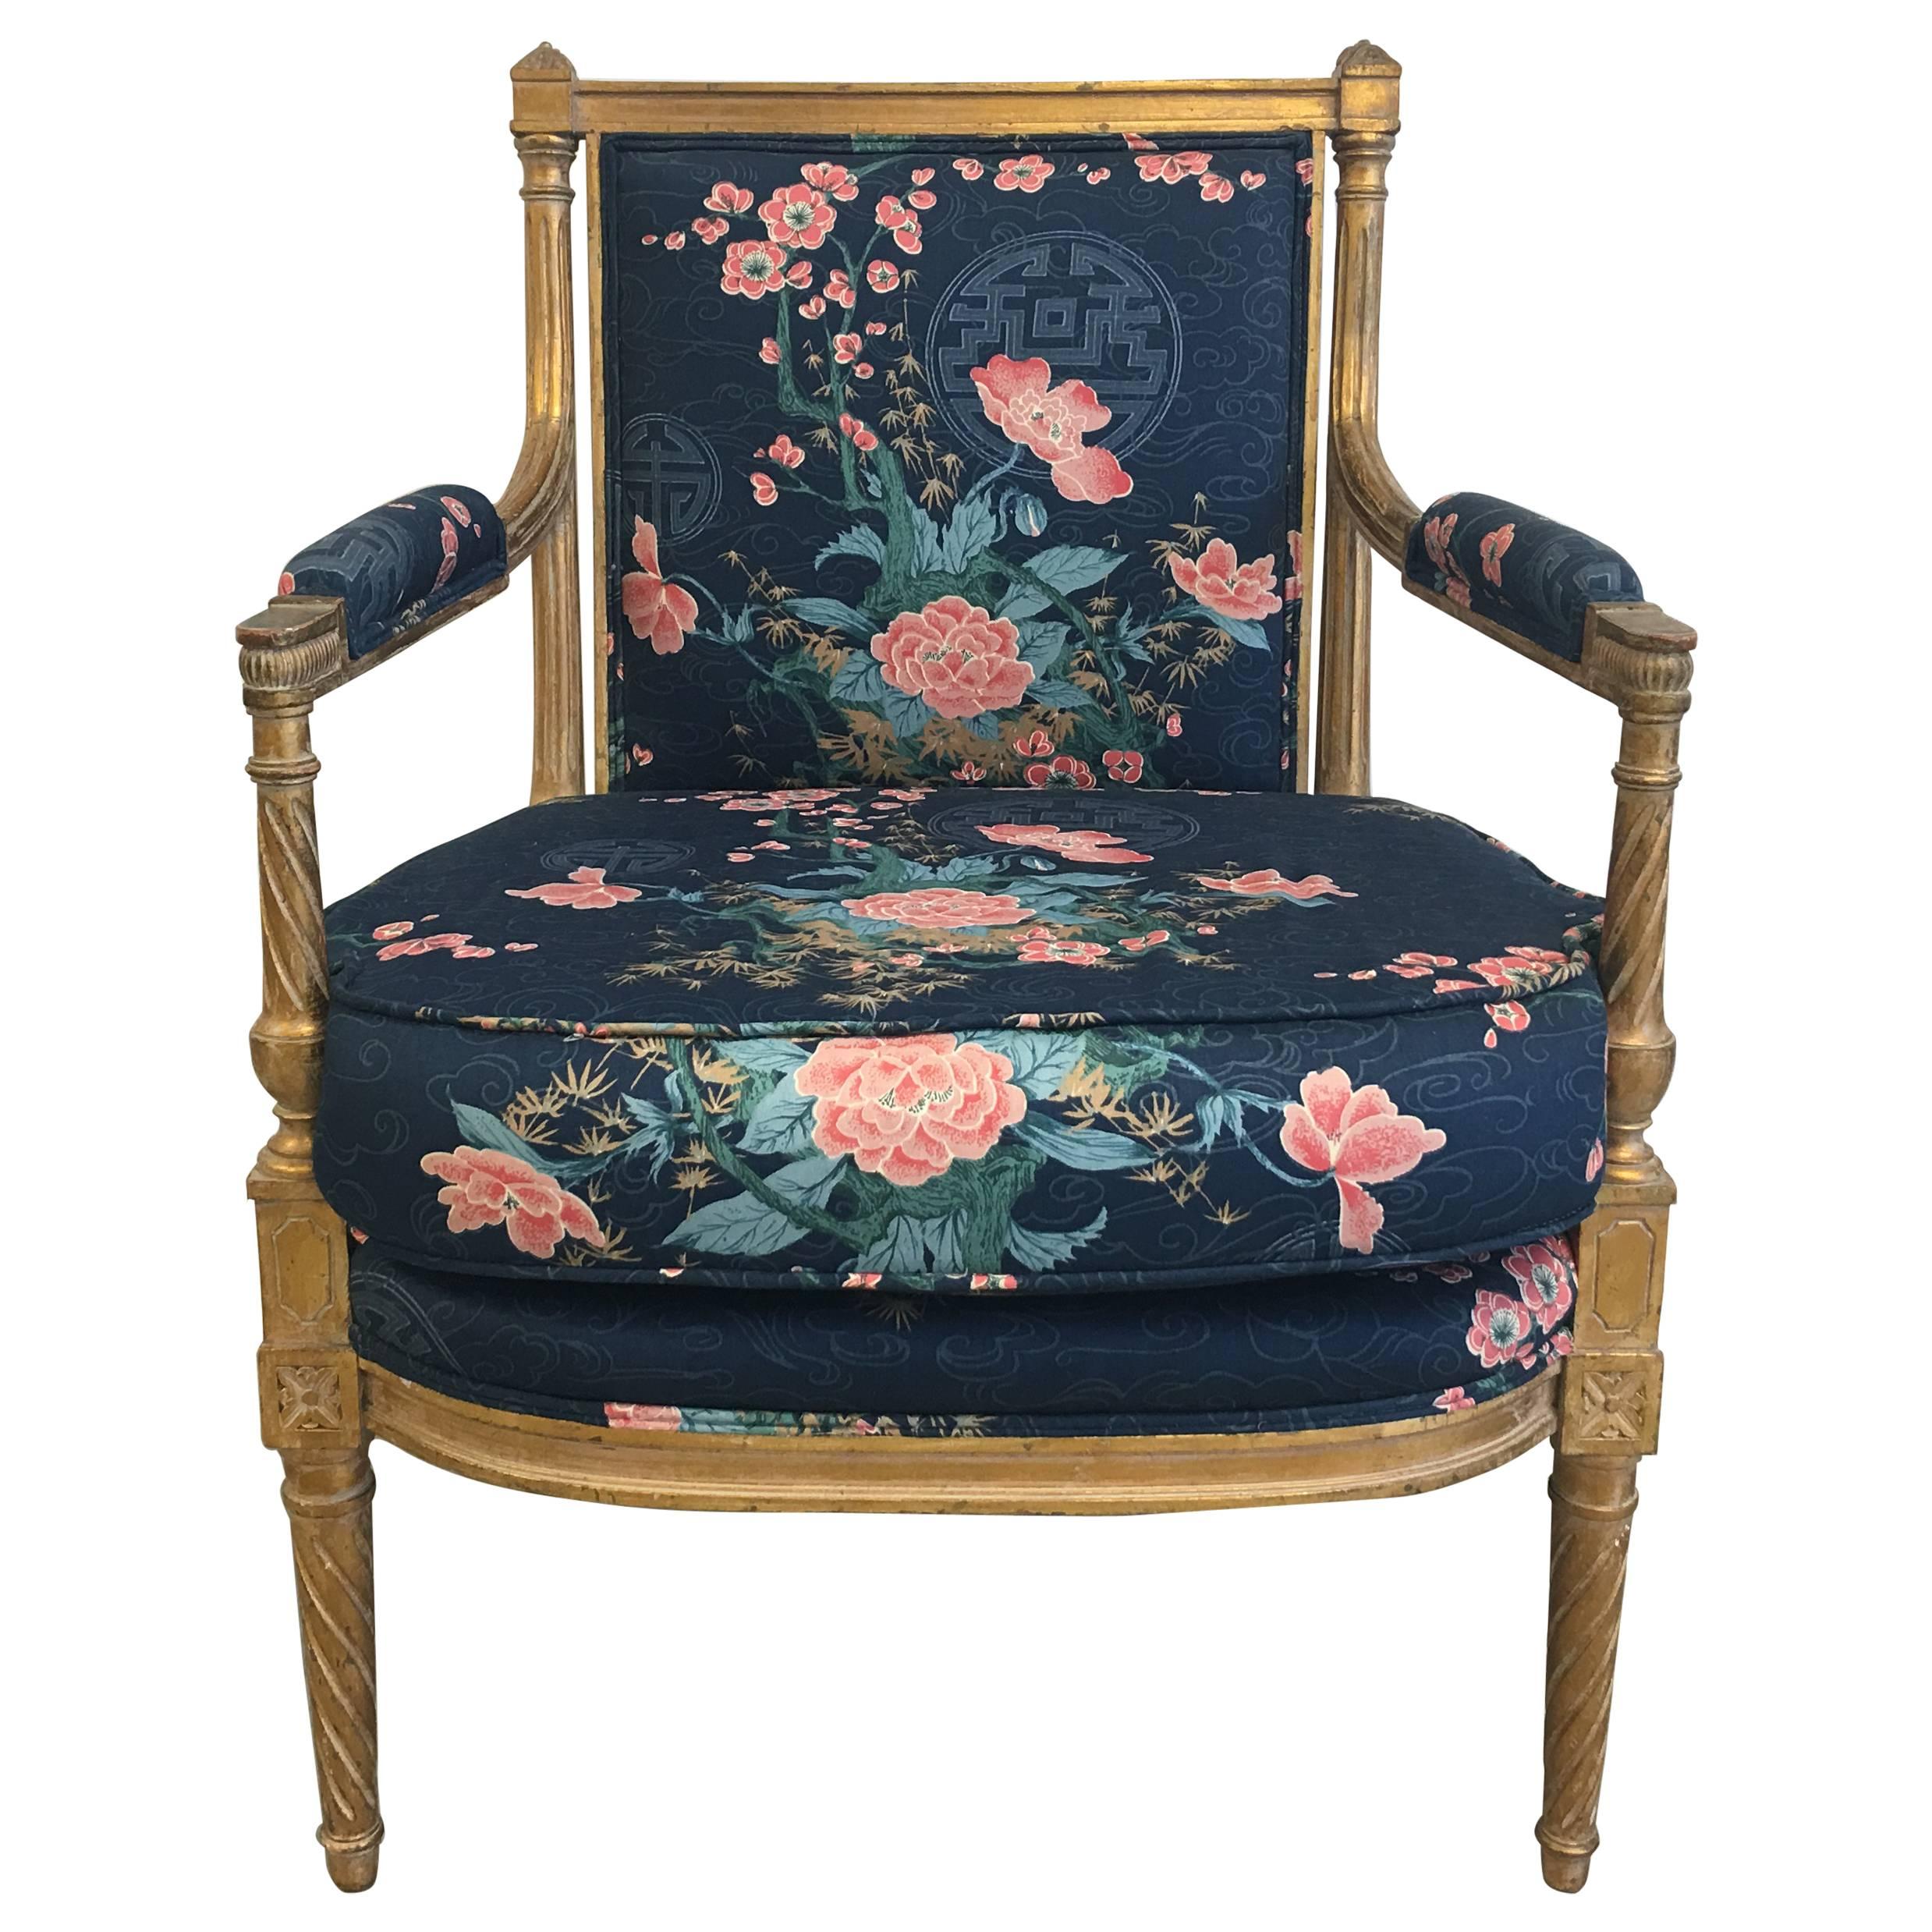 1950s Chinoiserie Gilt Armchair with Navy Cherry Blossom Upholstery